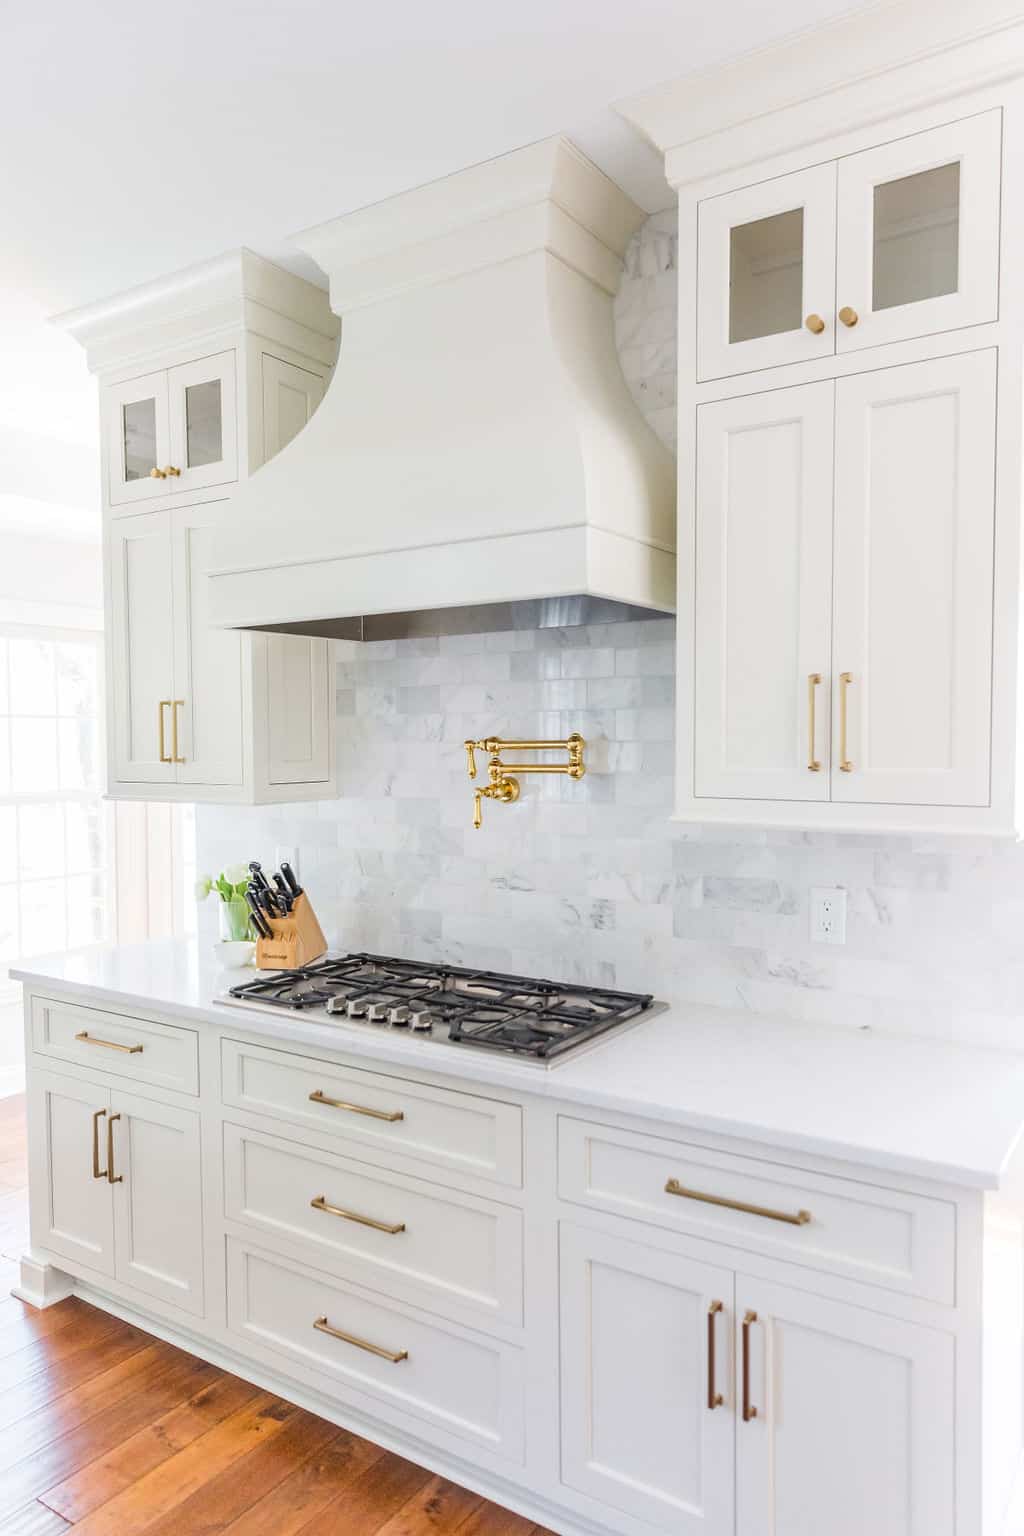 Nicholas Design Build | Remodel of a kitchen with white cabinets and a gold hood.